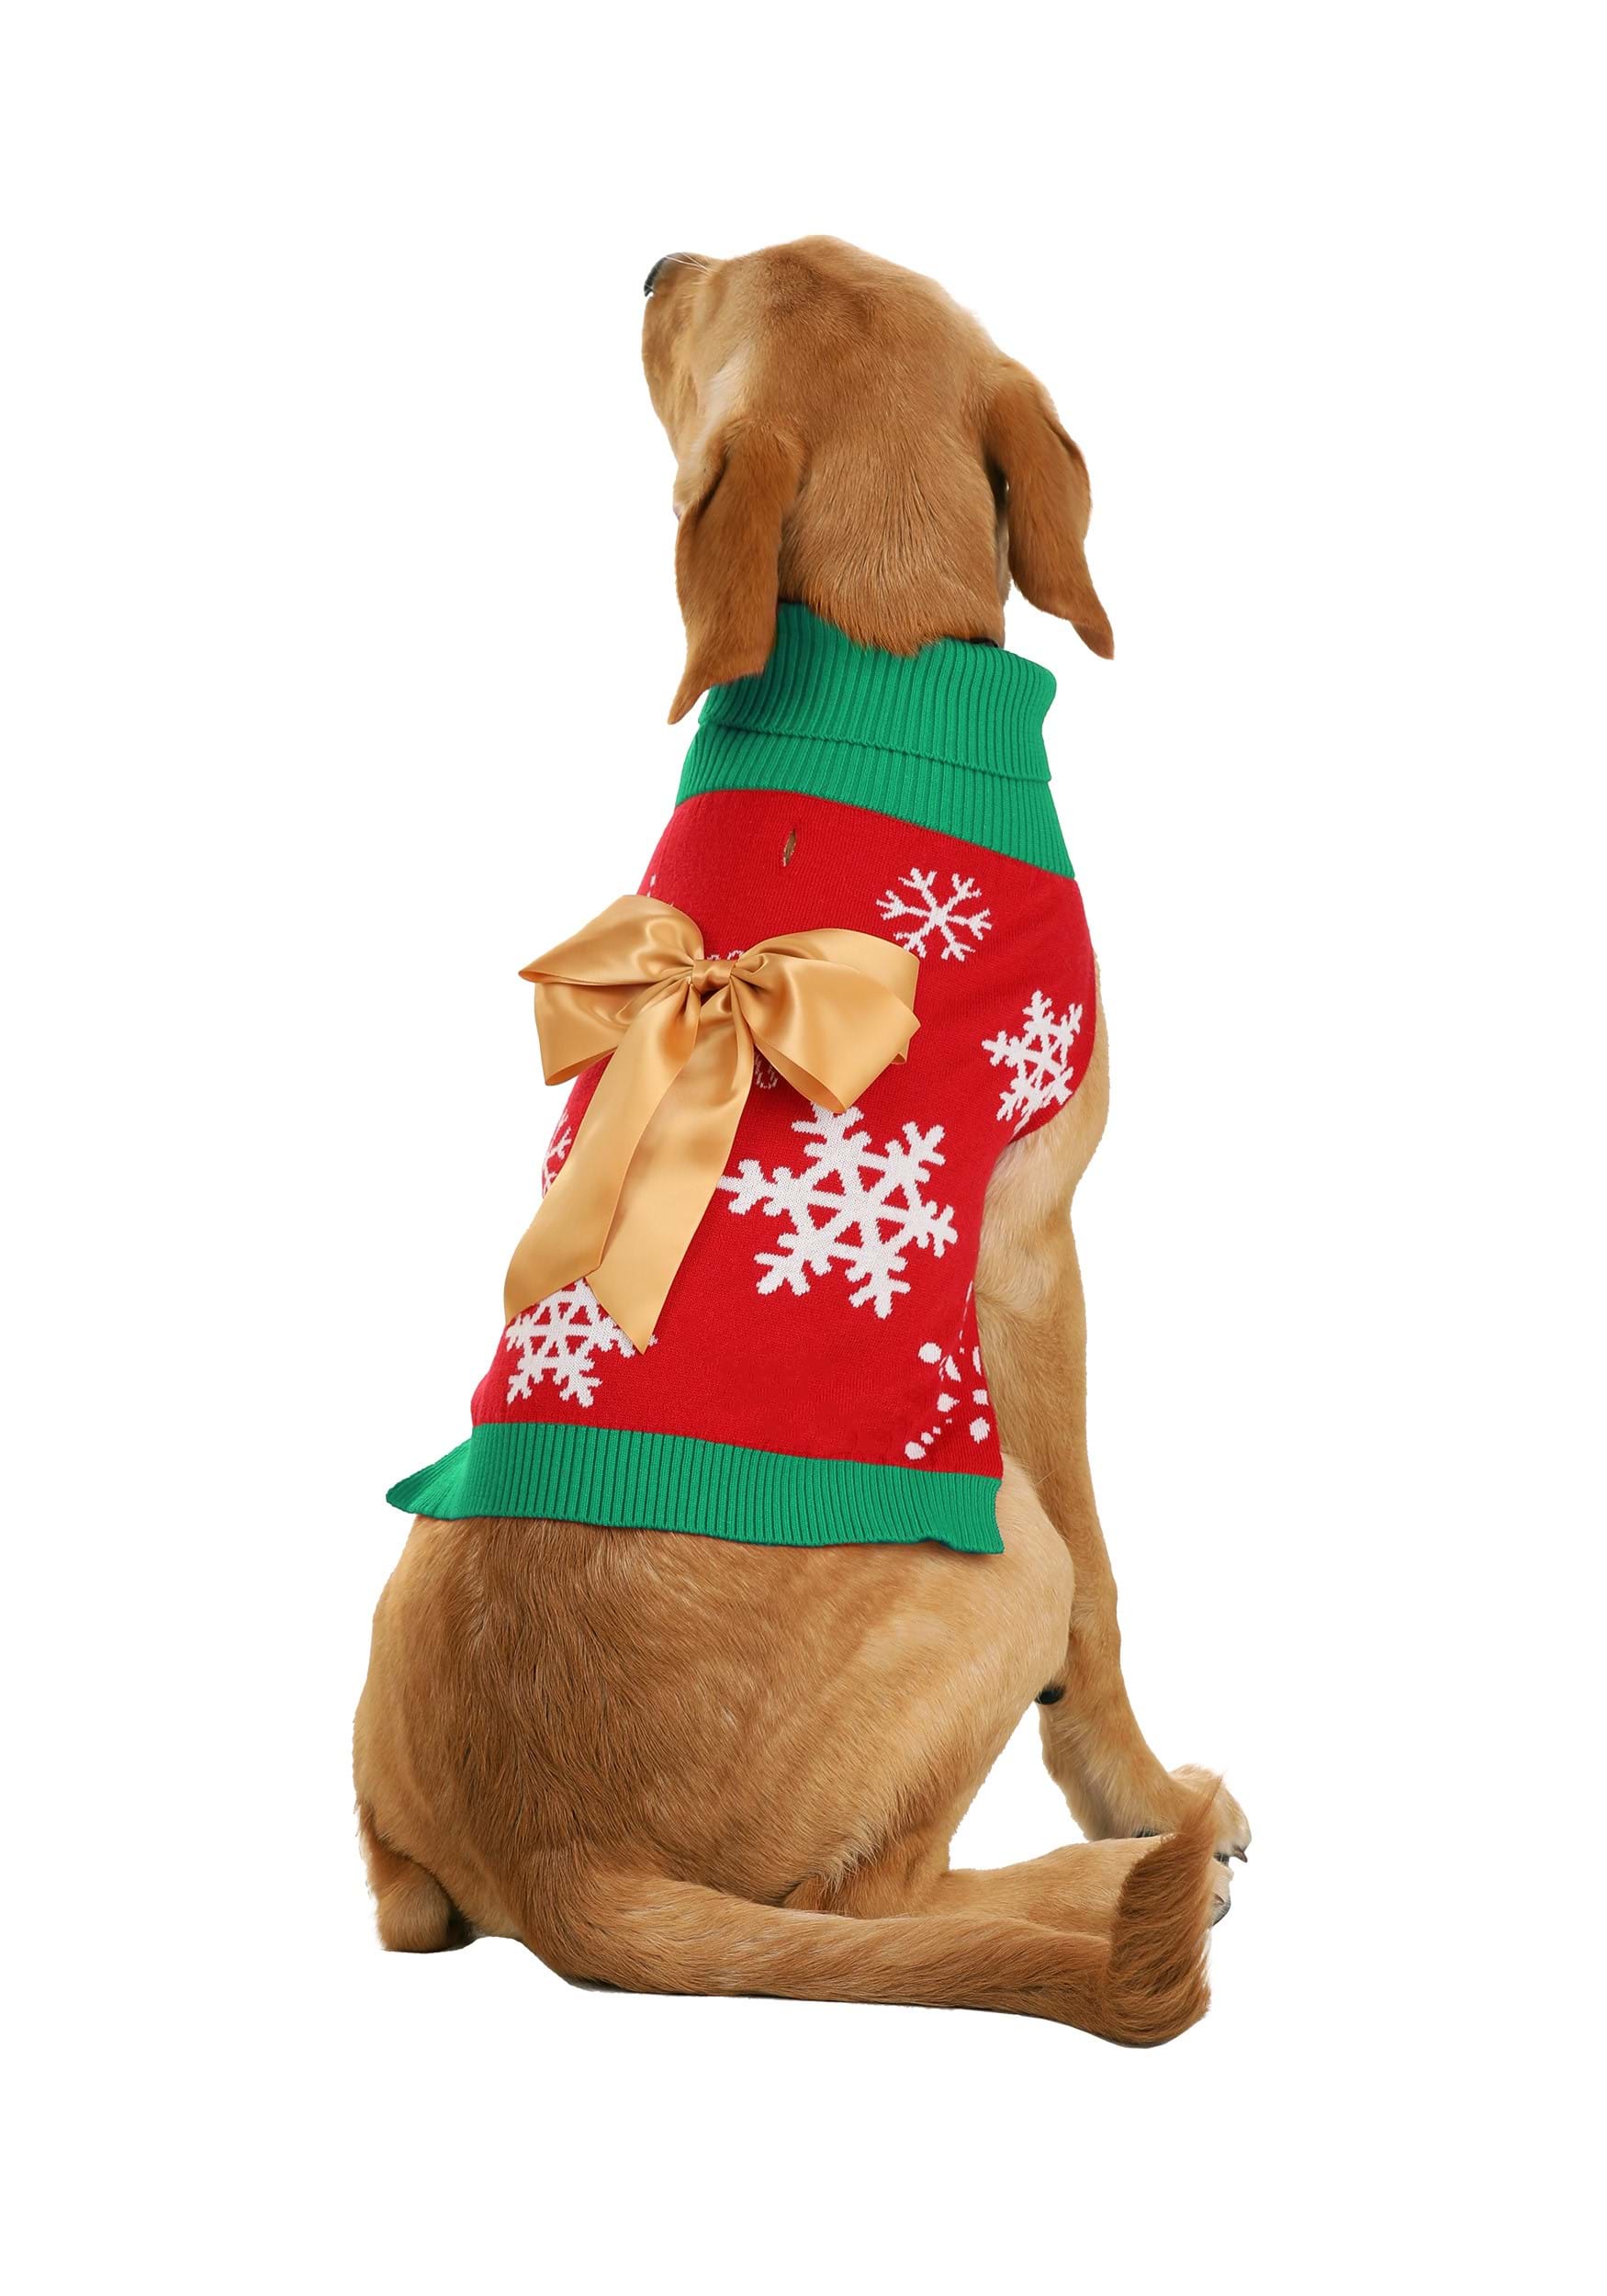 https://images.fun.com/products/83365/2-1-260099/christmas-present-dog-sweater-alt-5.jpg